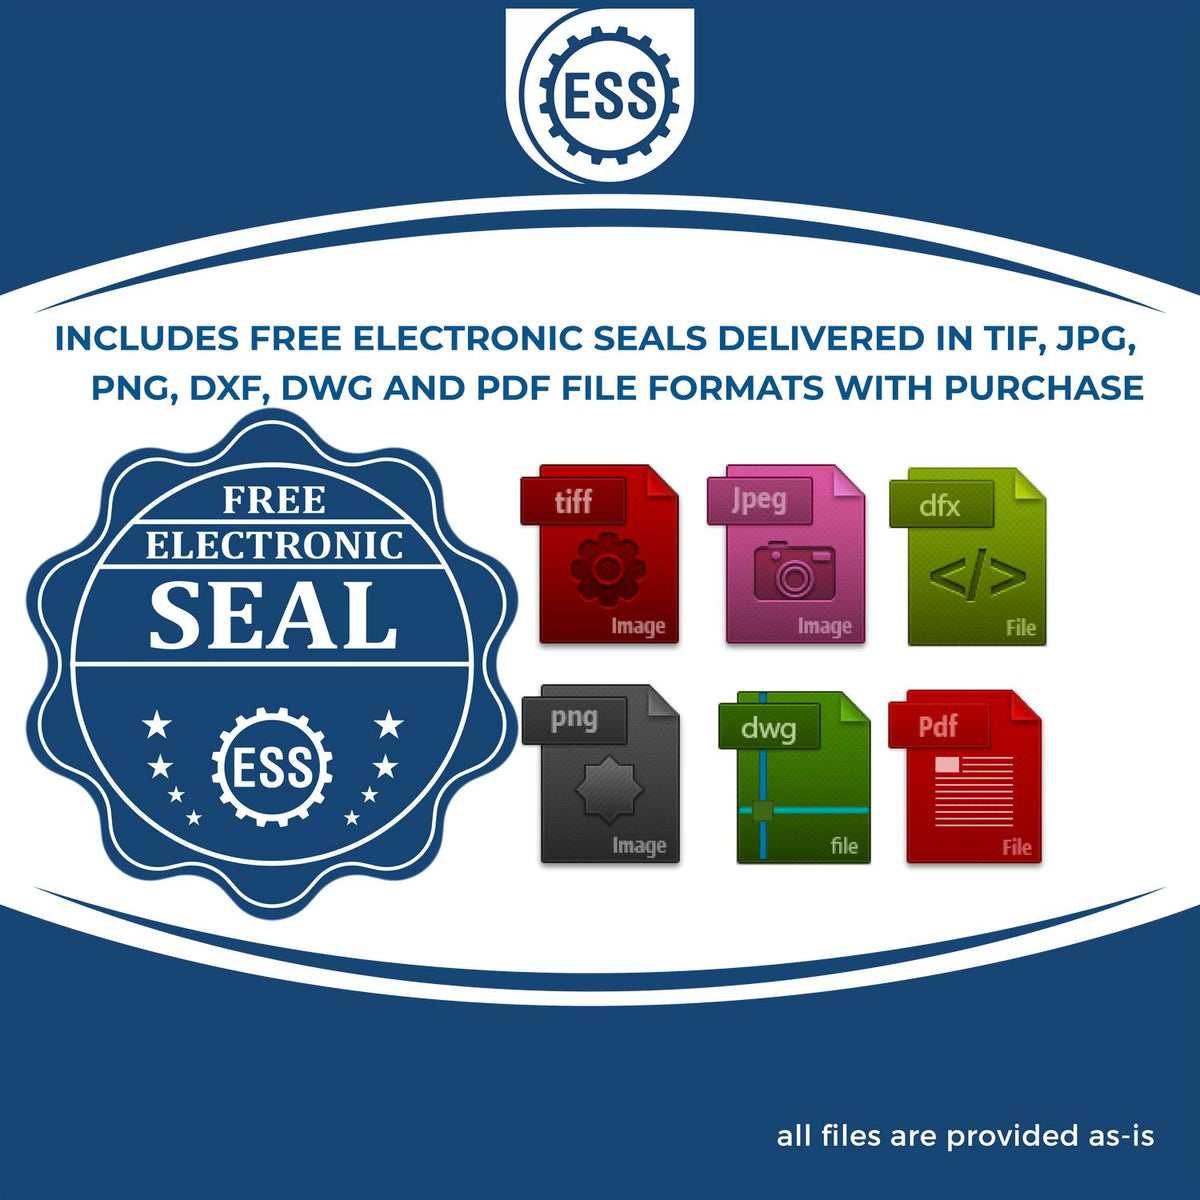 An infographic for the free electronic seal for the Long Reach Alabama PE Seal illustrating the different file type icons such as DXF, DWG, TIF, JPG and PNG.